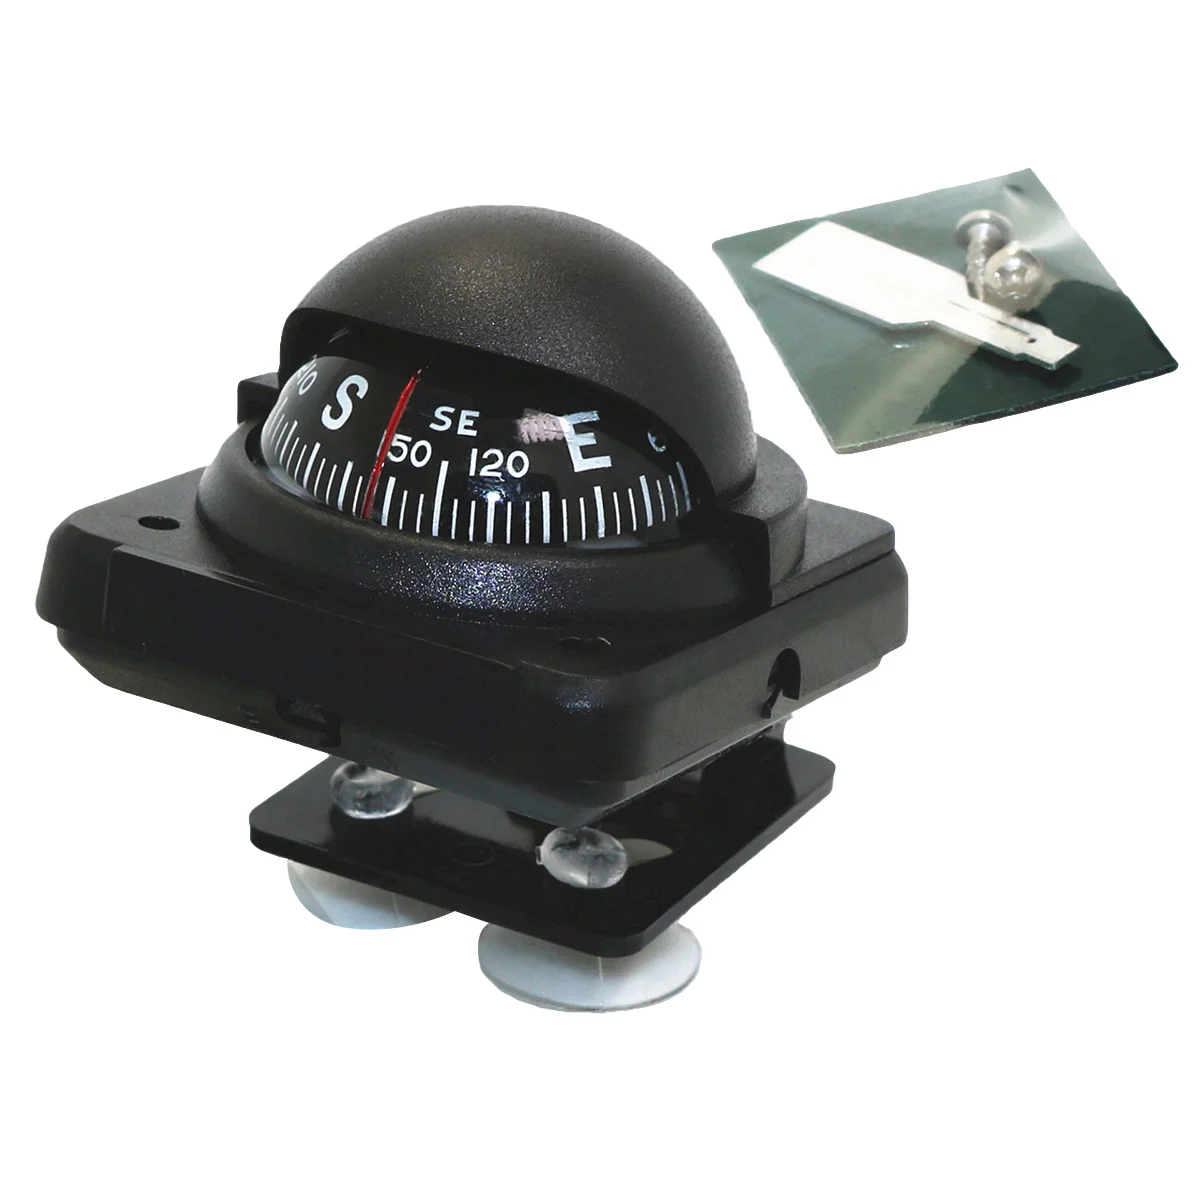 

Car Compass Declination Adjustment Guide Direction Pointing Marine Dashboard